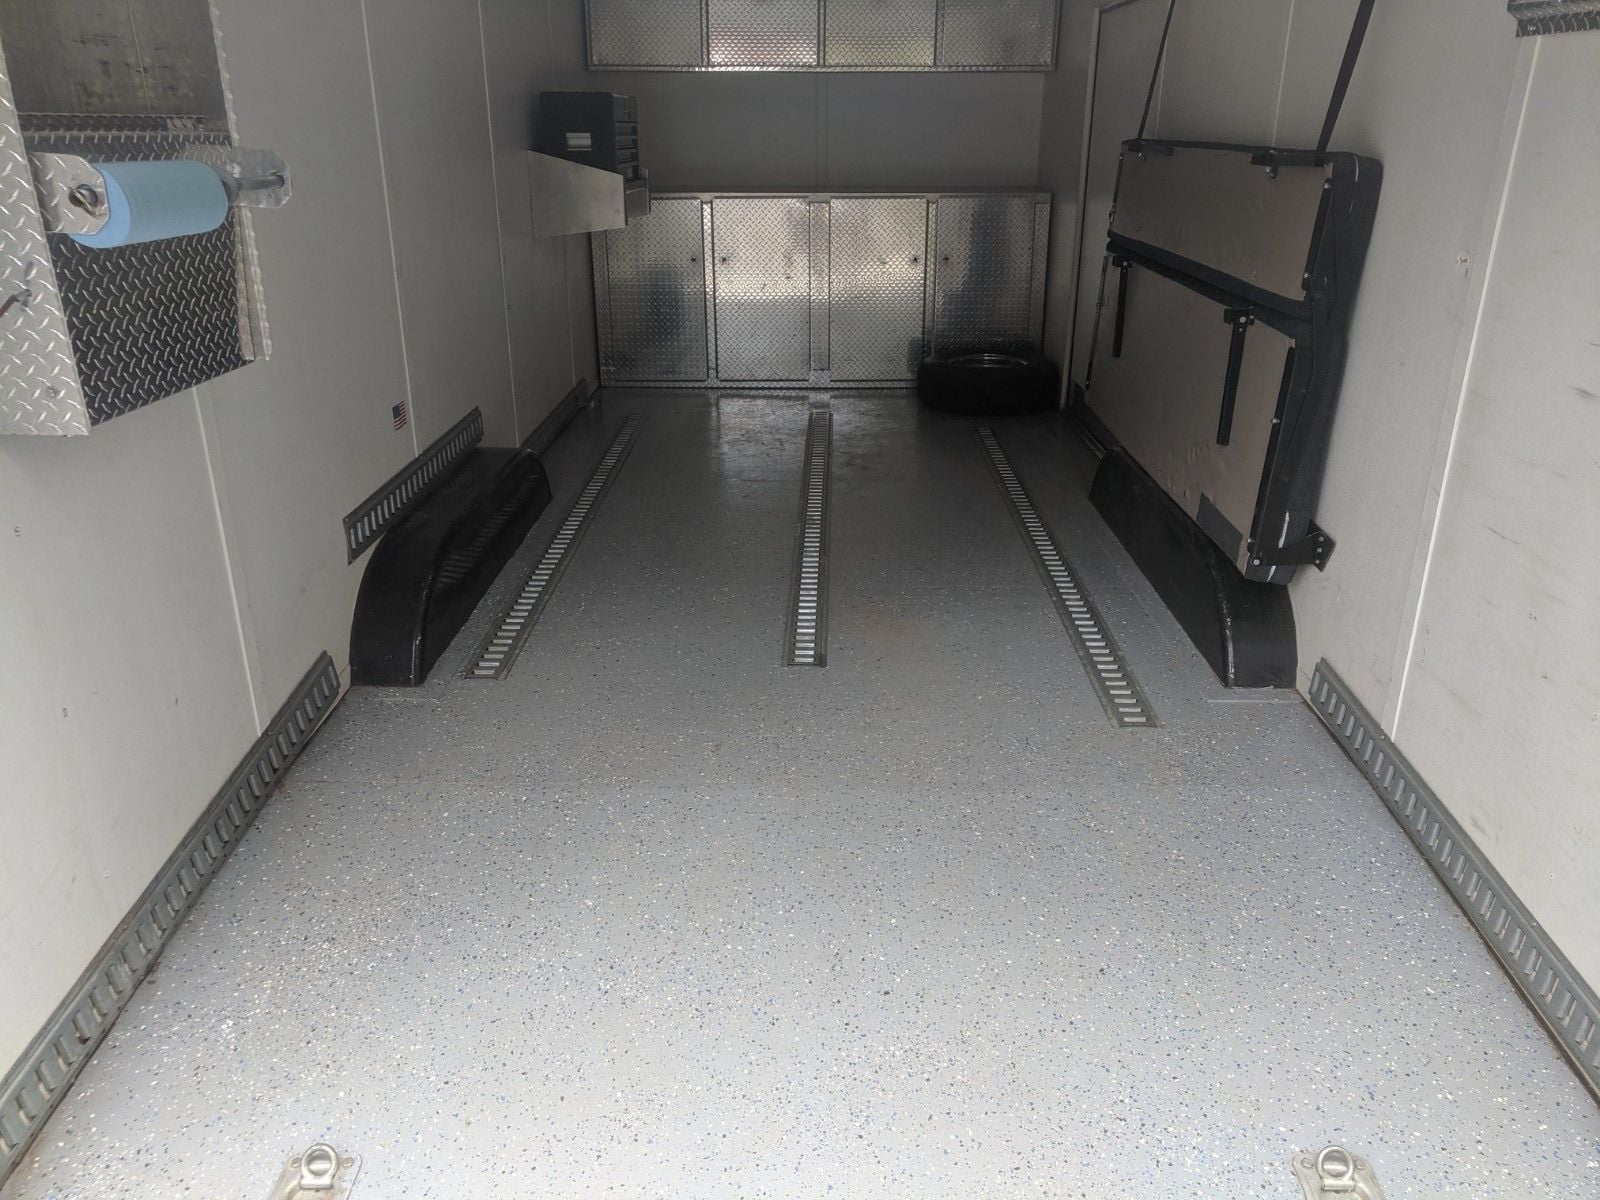 Miscellaneous - Carsen Racer 8.5 x 20 ft Enclosed Trailer - Used - Danville, CA 94506, United States